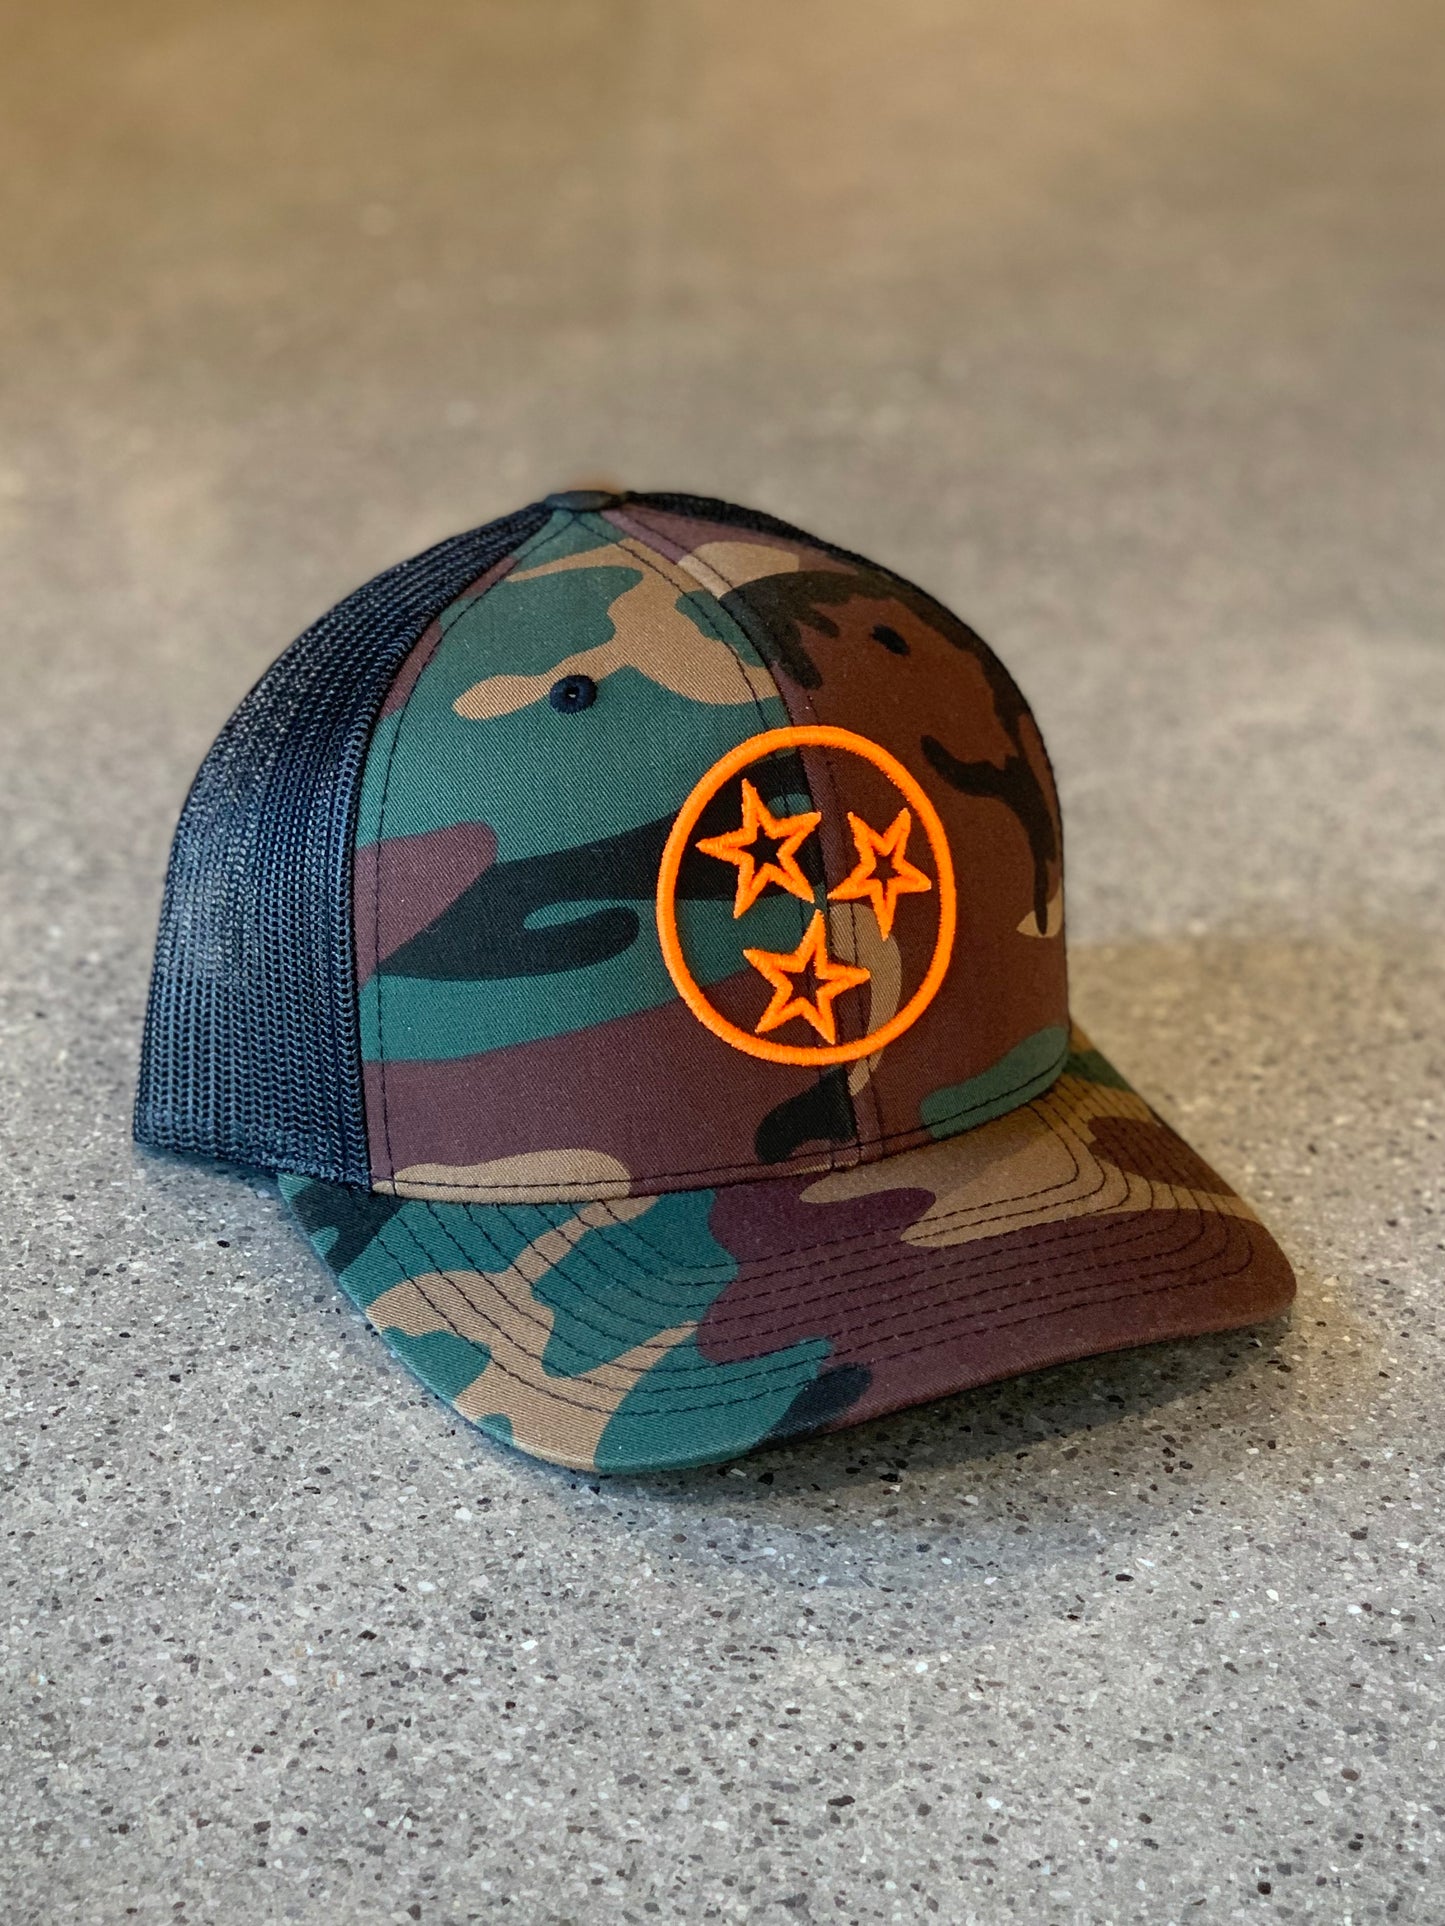 The Tristar Outline Trucker Hat - Camo